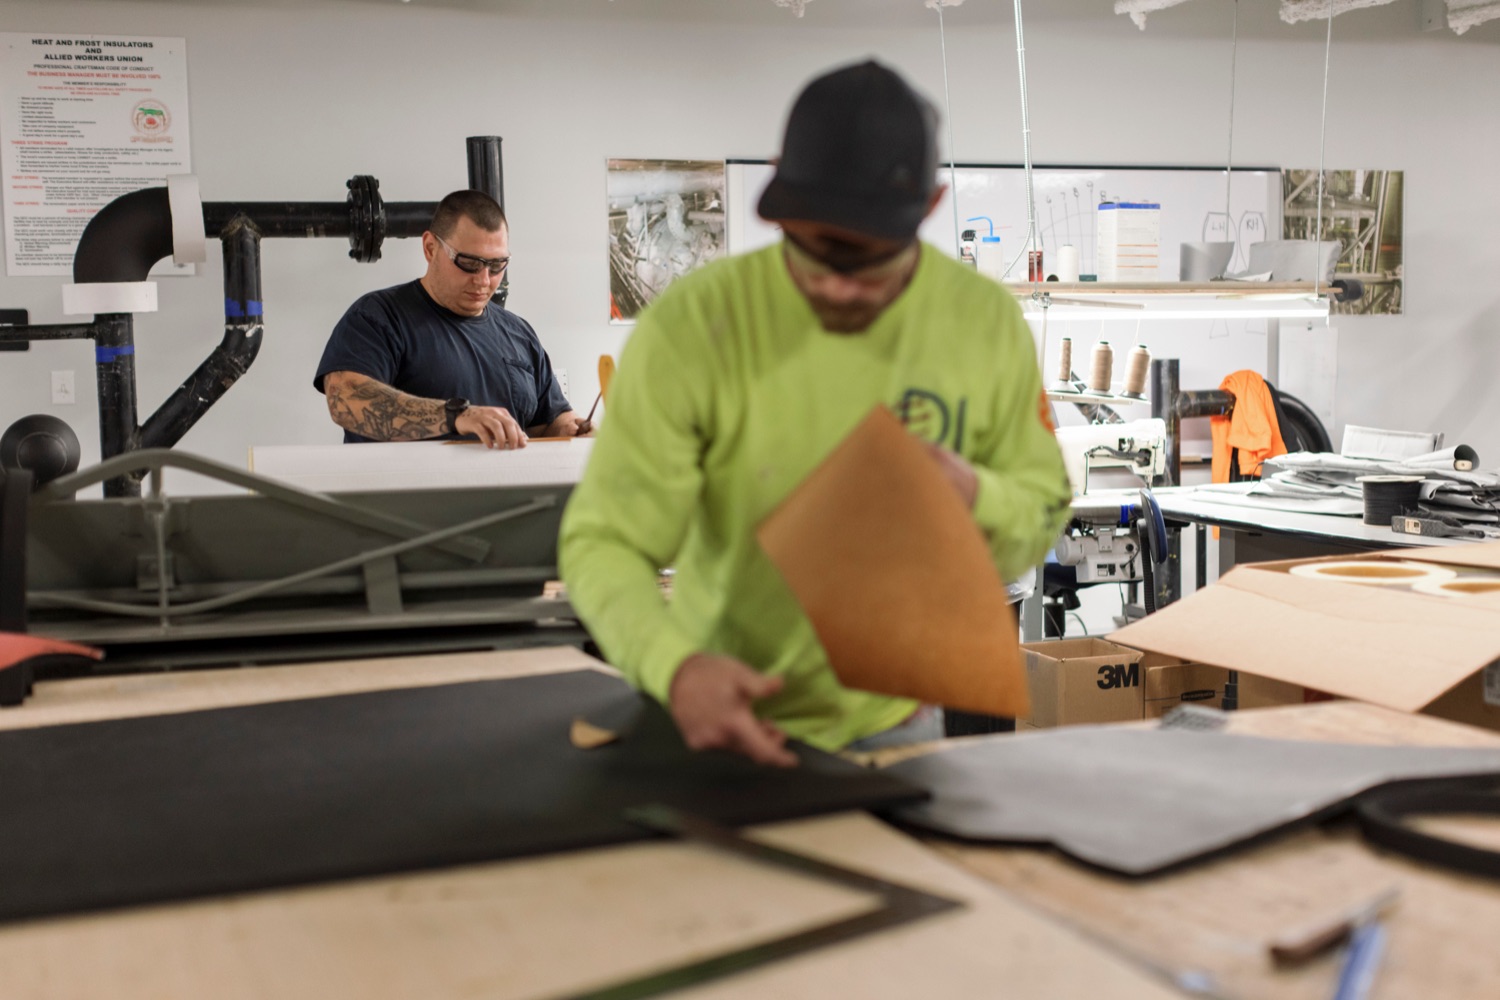 William Youmans, 27, left, and Jesse Welk, 27, work on layouts for pipe insulation following a press conference which kicked off National Apprenticeship Week with a visit to Heat and Frost Insulators Local 23, a training center in Dauphin County, on Monday, November 14, 2022. National Apprenticeship Week (NAW) is a nationwide celebration for industry, labor, equity, workforce, education and government leaders to showcase the successes and value of registered apprenticeship for building our economy, advancing racial and gender equity, and supporting underserved communities.<br><a href="https://filesource.amperwave.net/commonwealthofpa/photo/22344_li_apprenticeshipweek_NK_017.JPG" target="_blank">⇣ Download Photo</a>